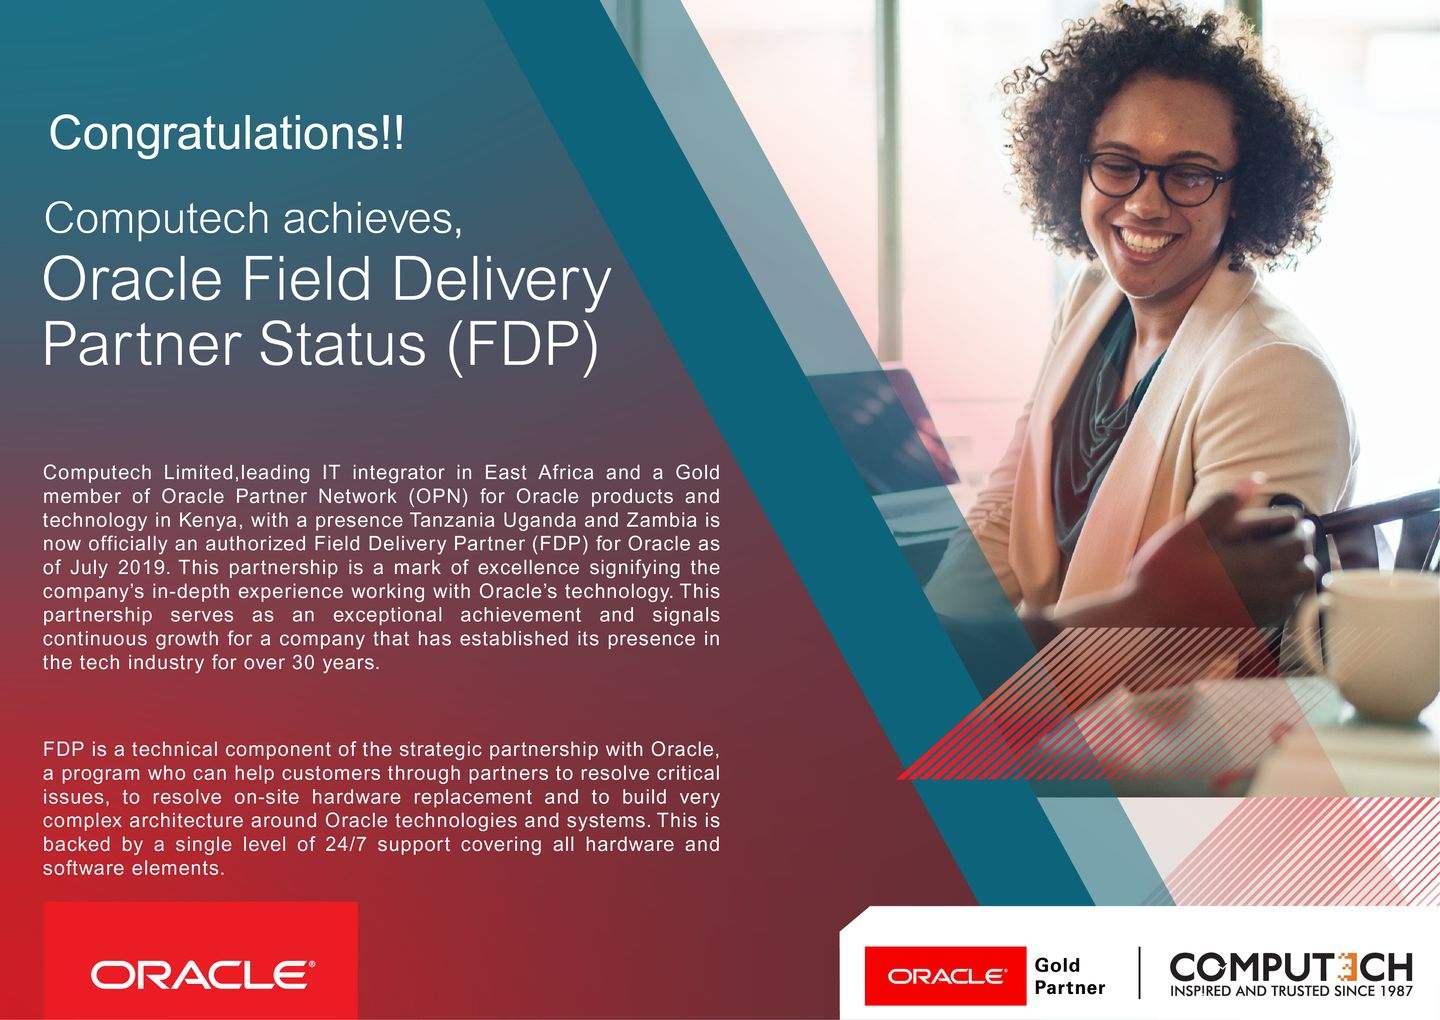 Computech awarded with the oracle Field Delivery Partner Status (FDP)